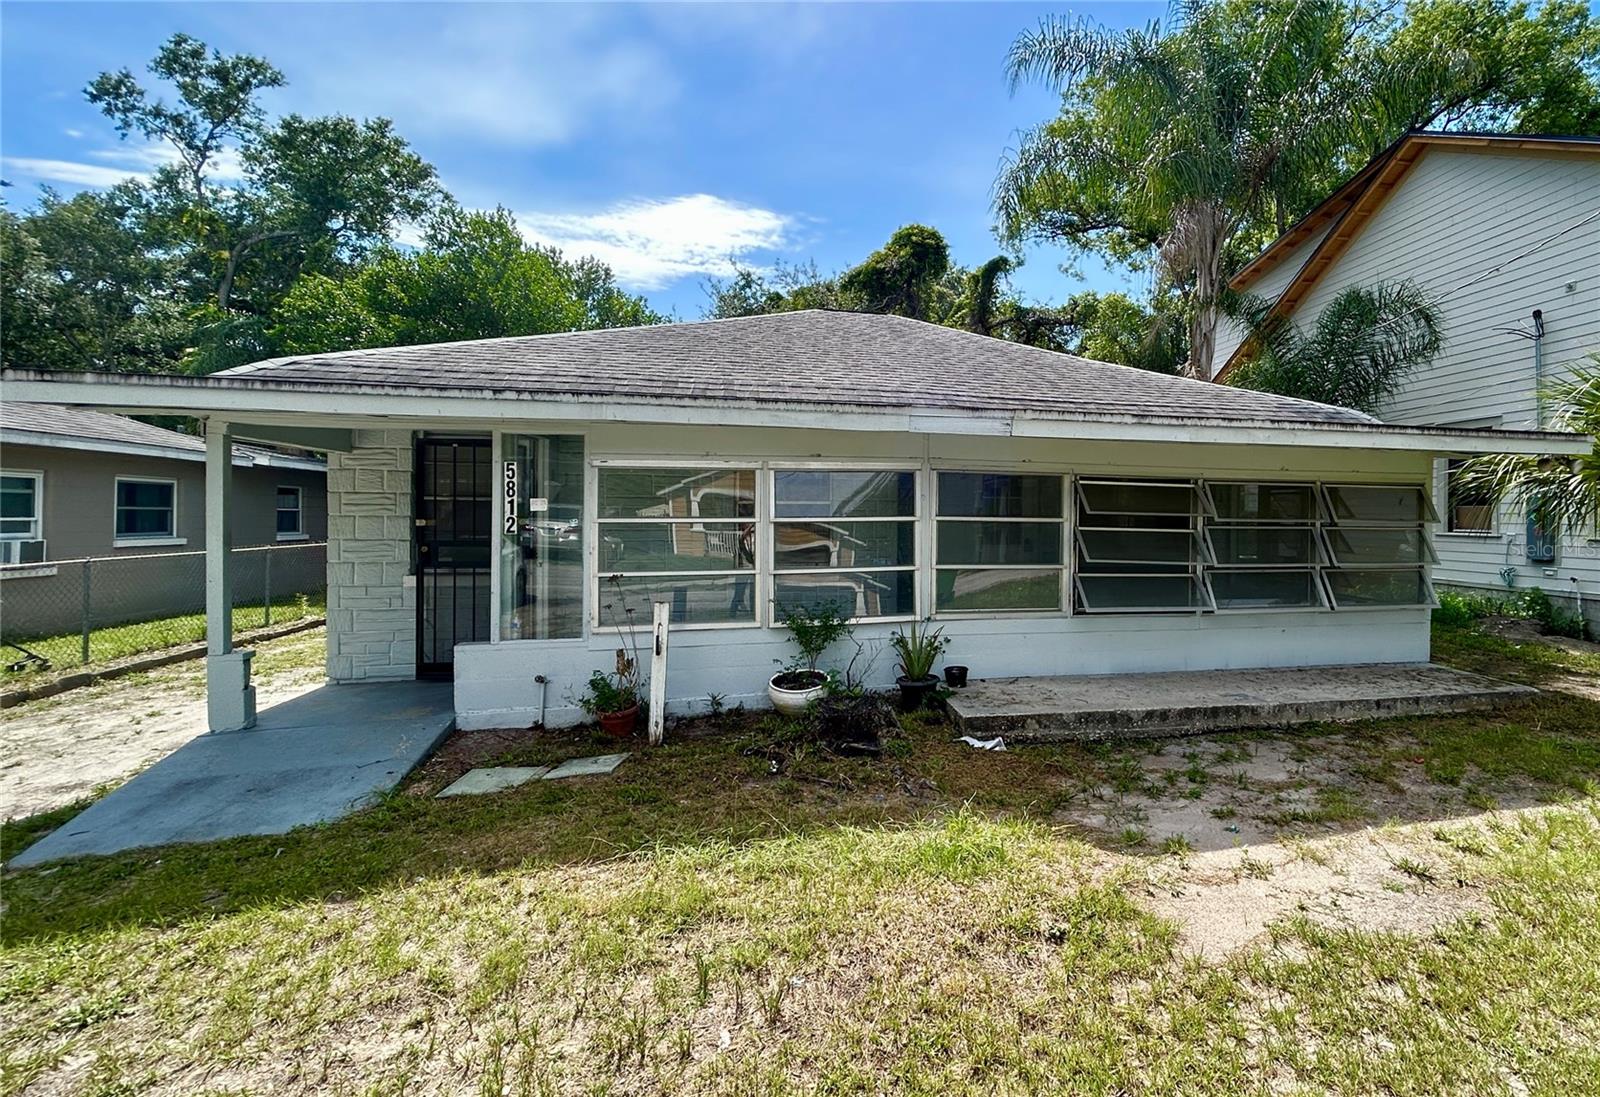 Details for 5812 18th Street, TAMPA, FL 33610